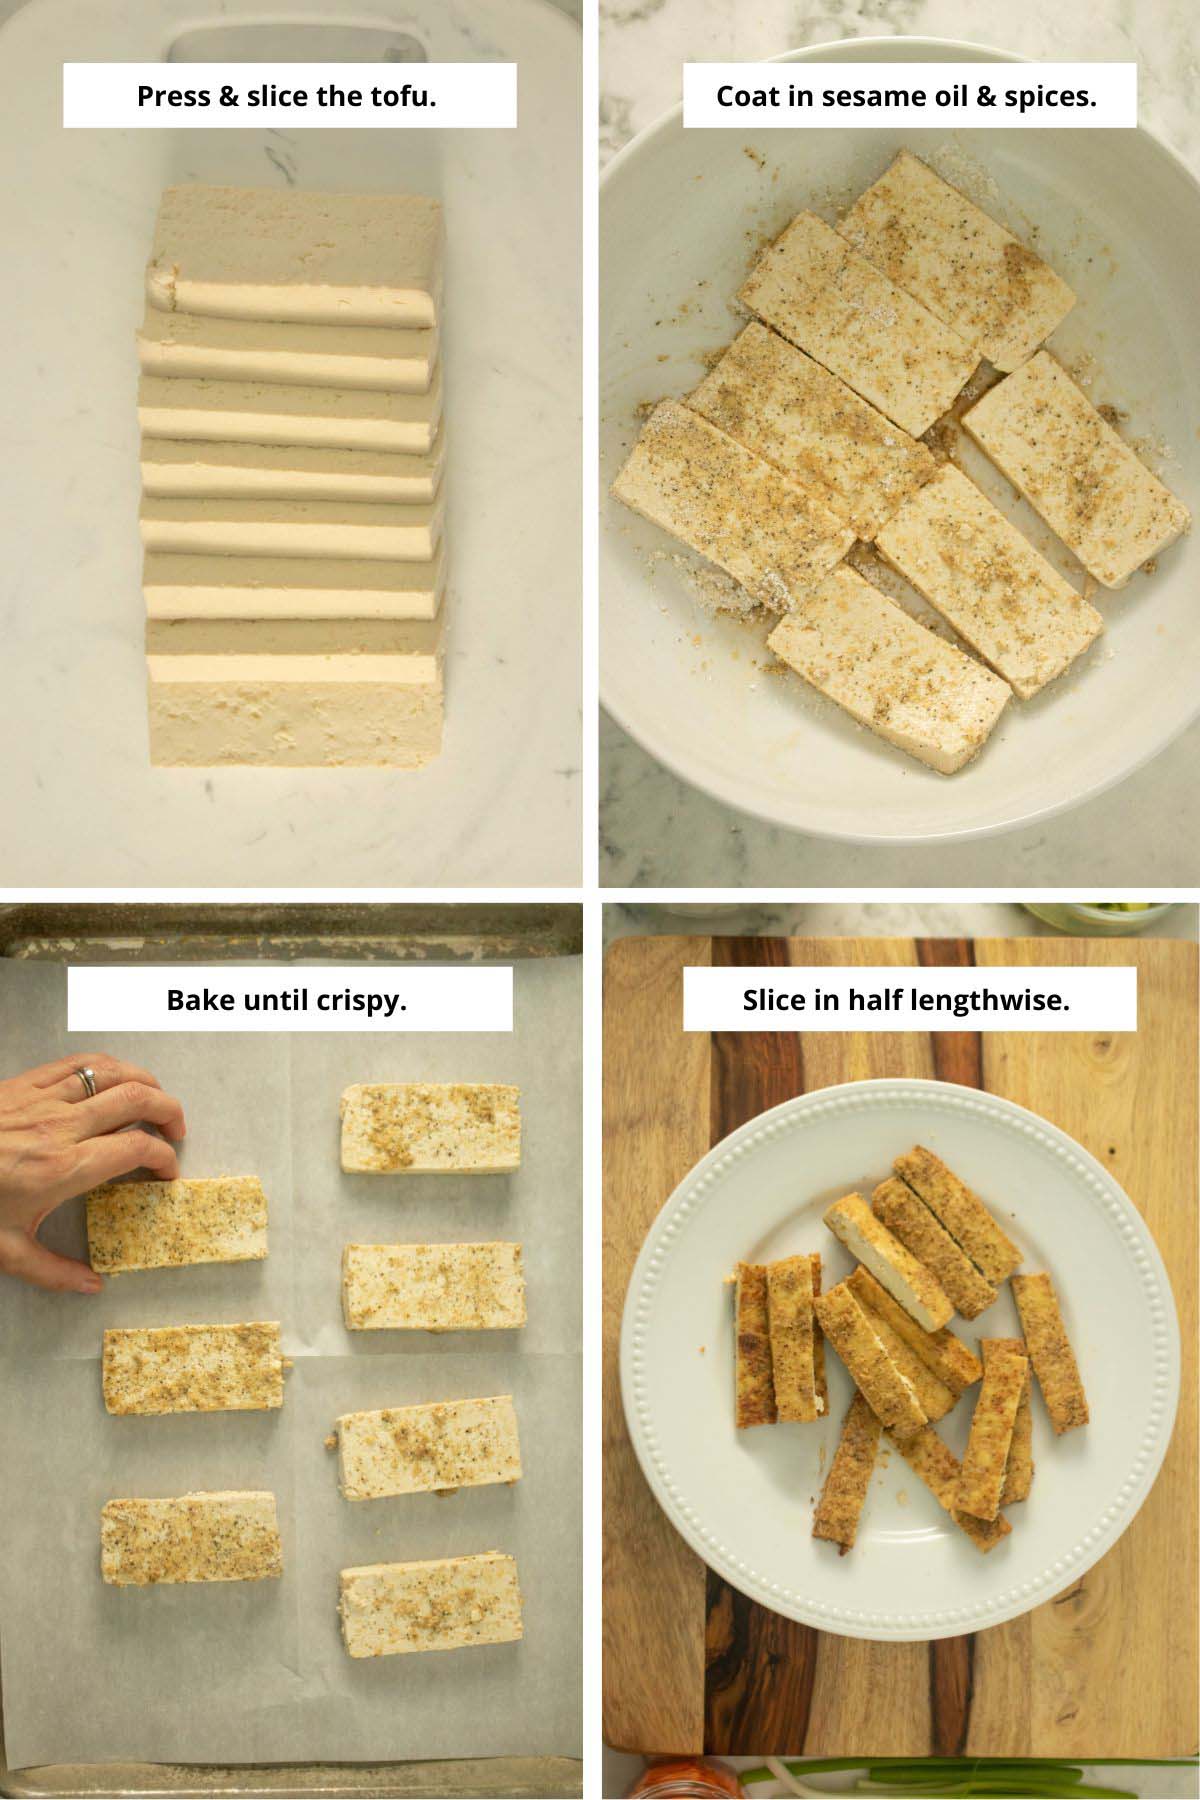 image collage showing sliced tofu on the cutting board, in a bowl, on a baking sheet, and after baking and slicing in half